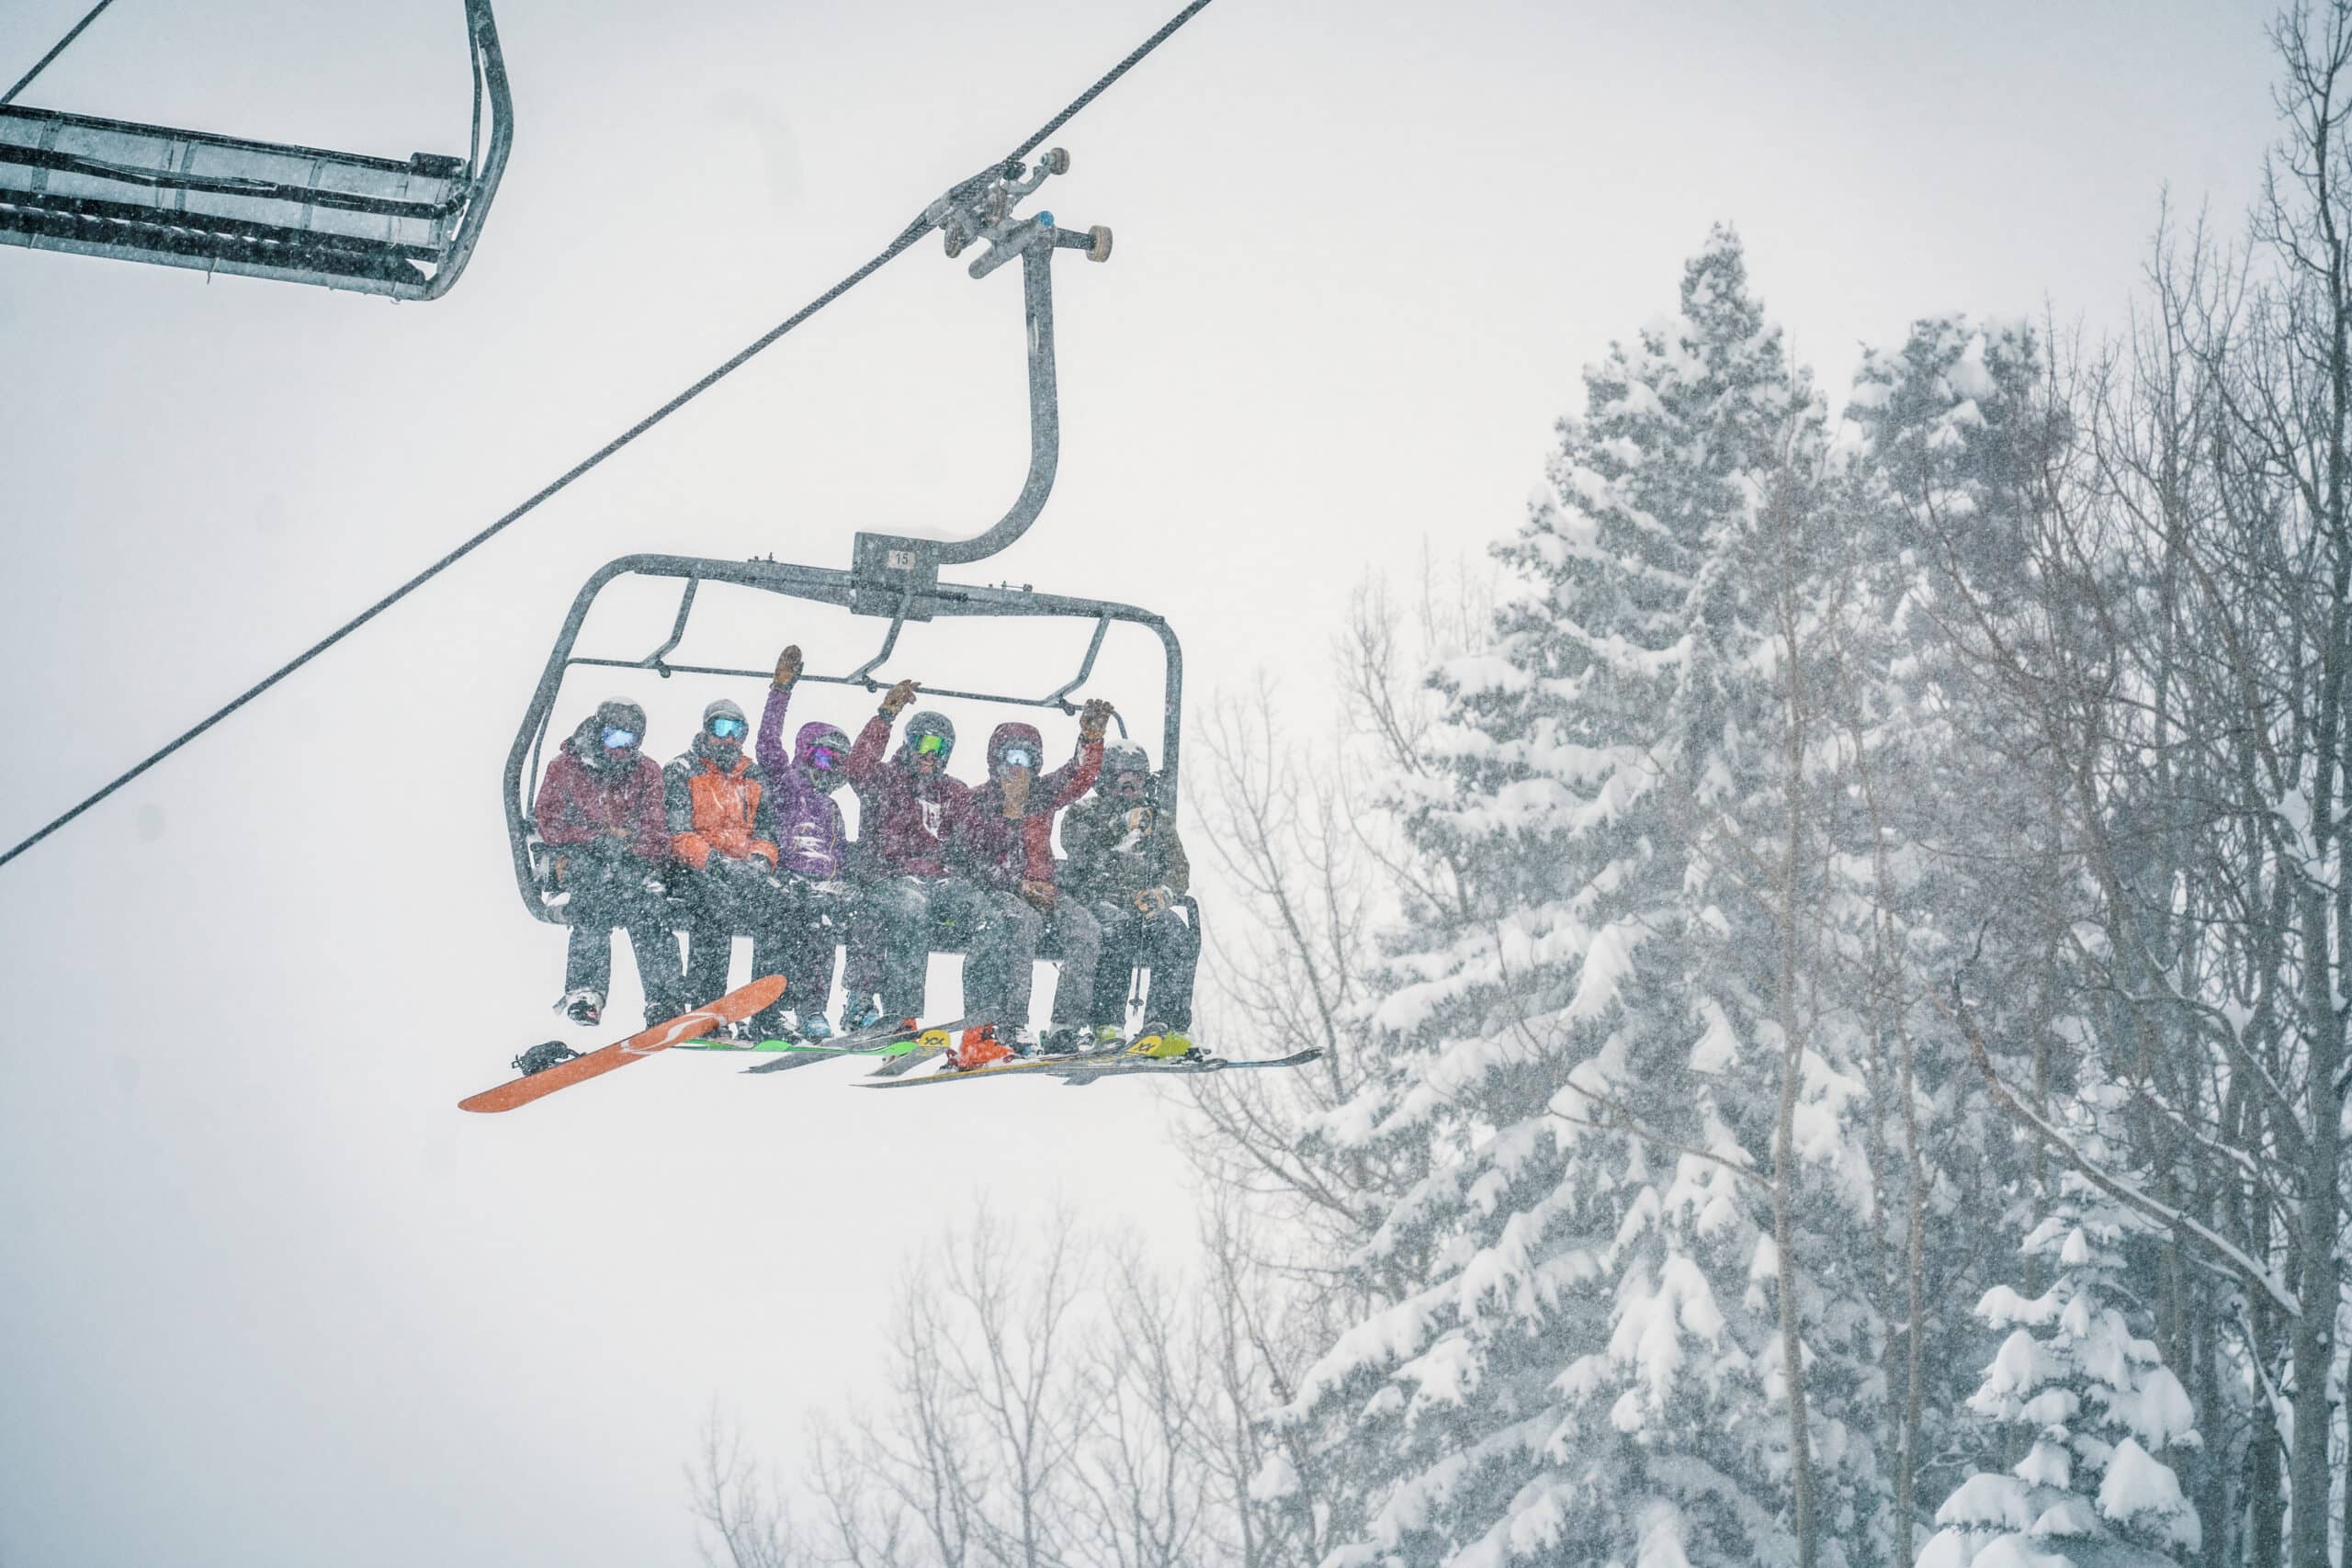 Friends ride the lift together on a powder day